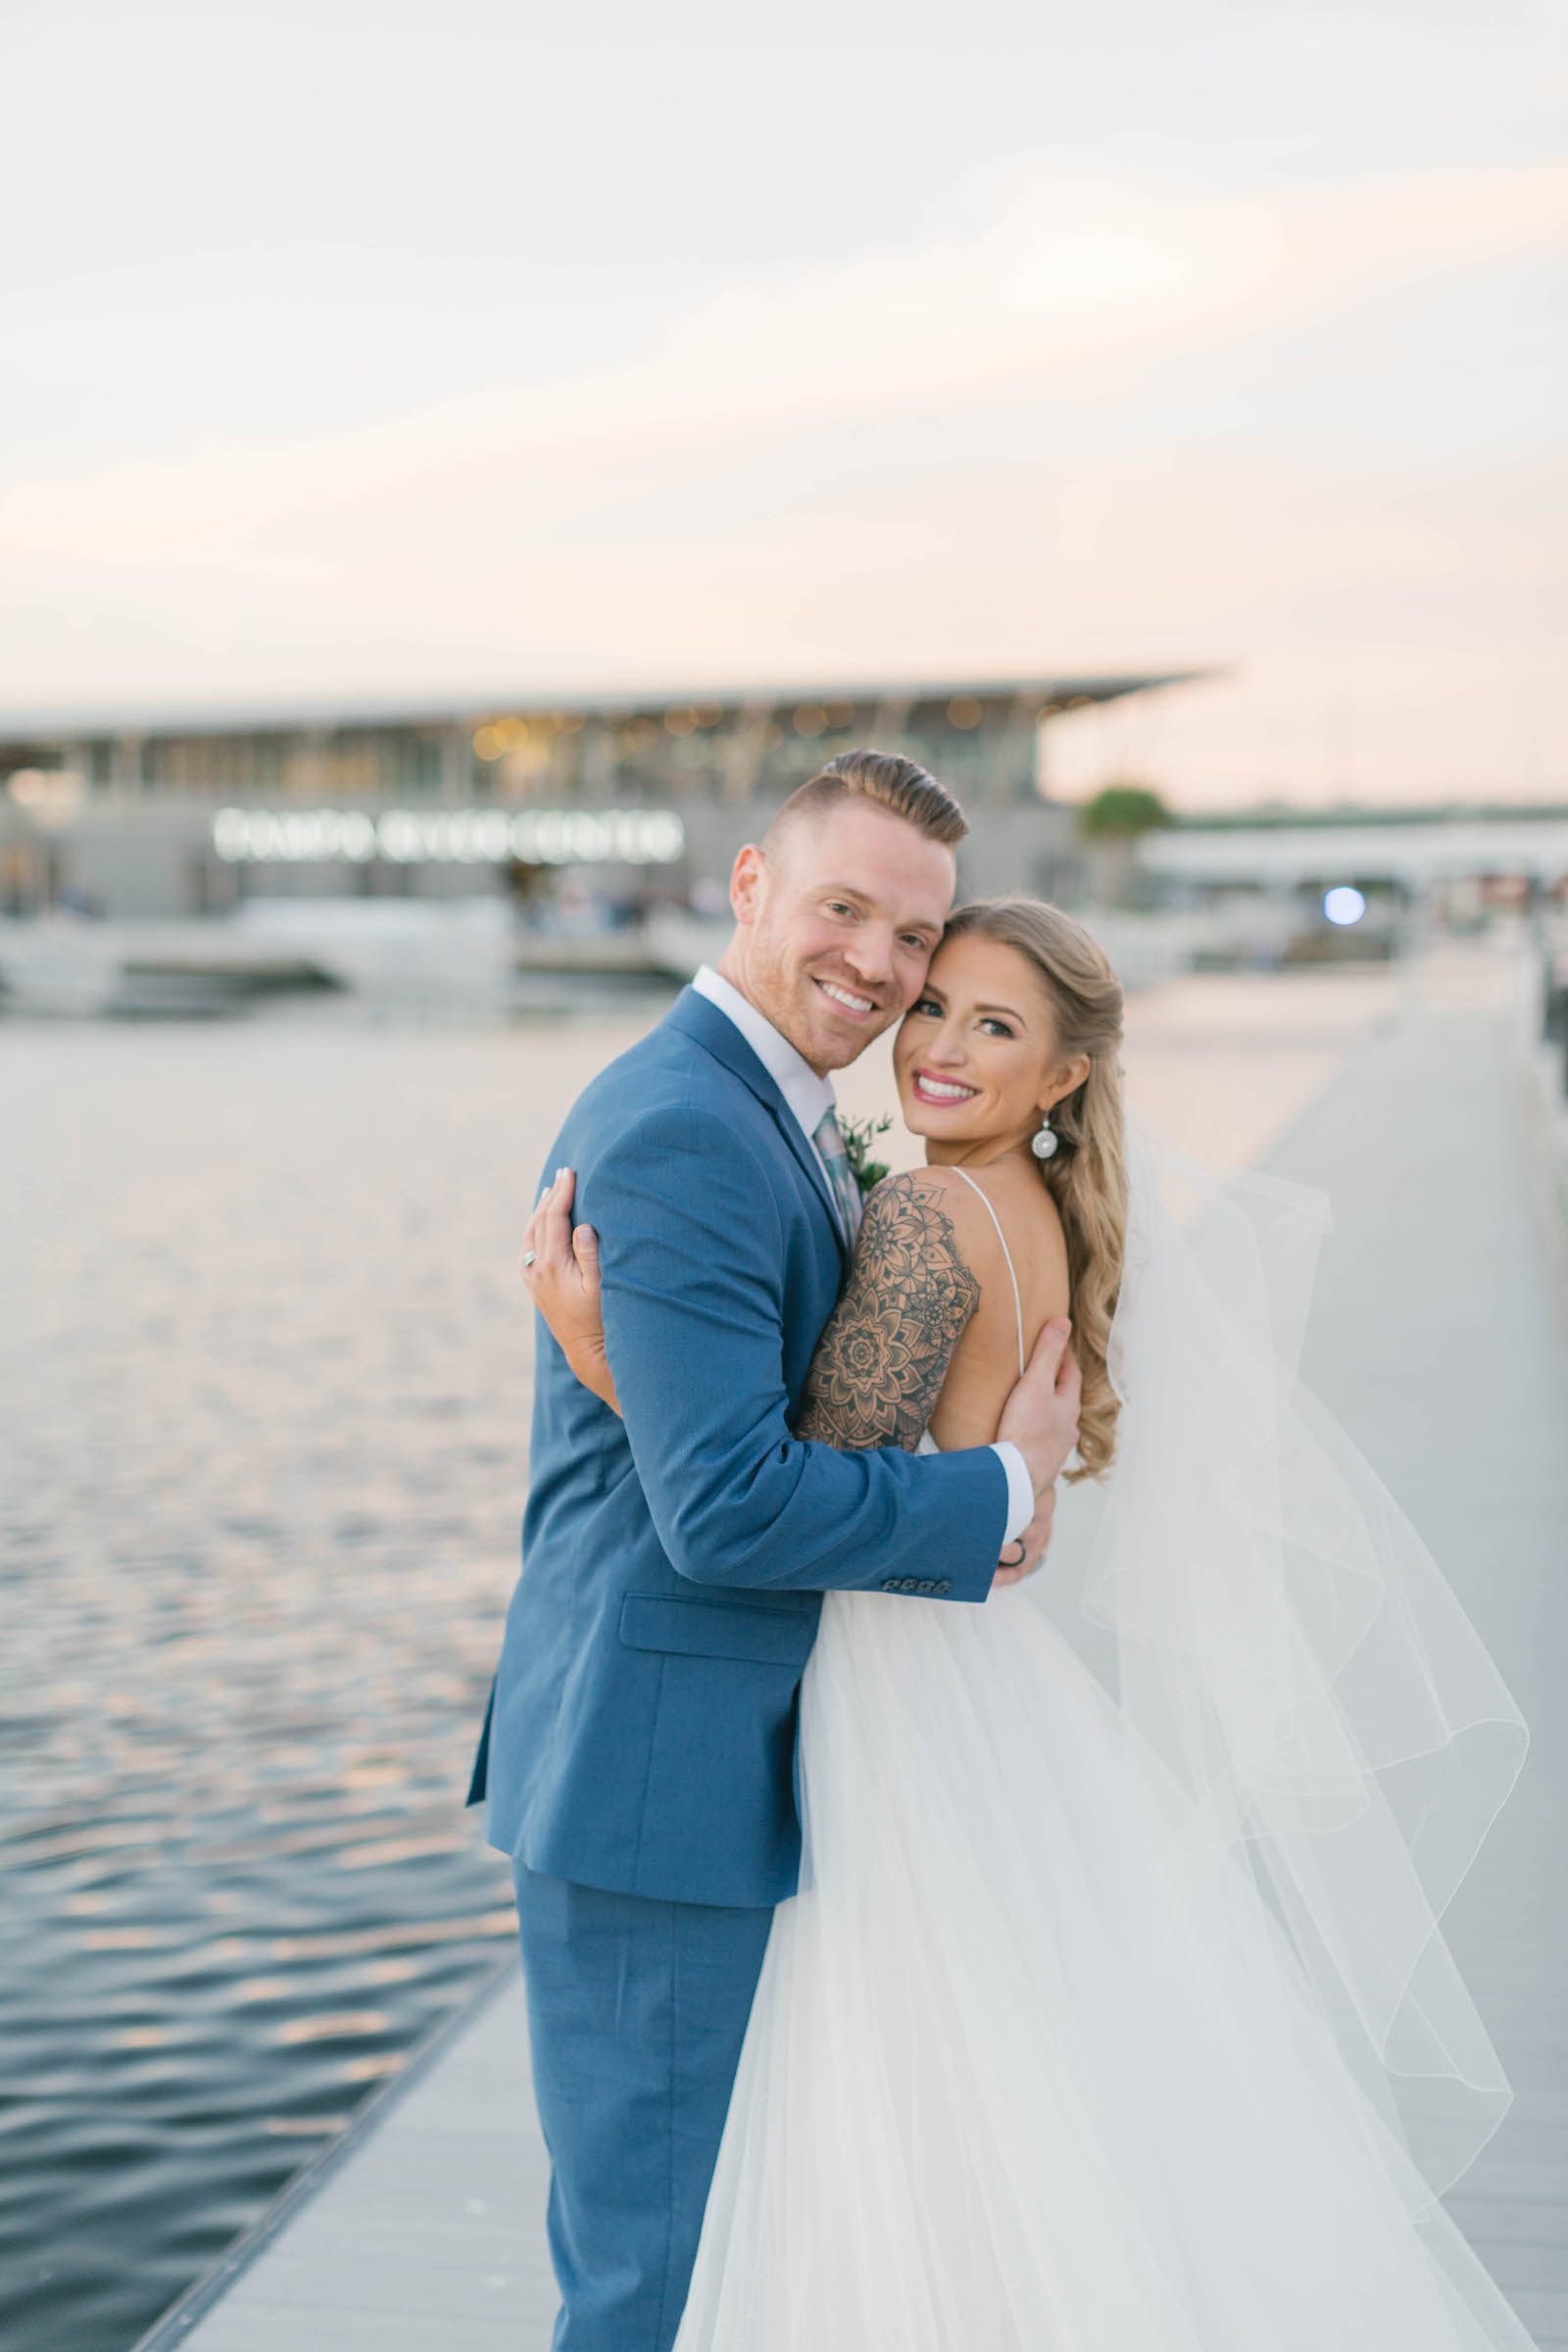 Tampa Bay Sunset Waterfront Bride and Groom Wedding Portrait on Boat Dock